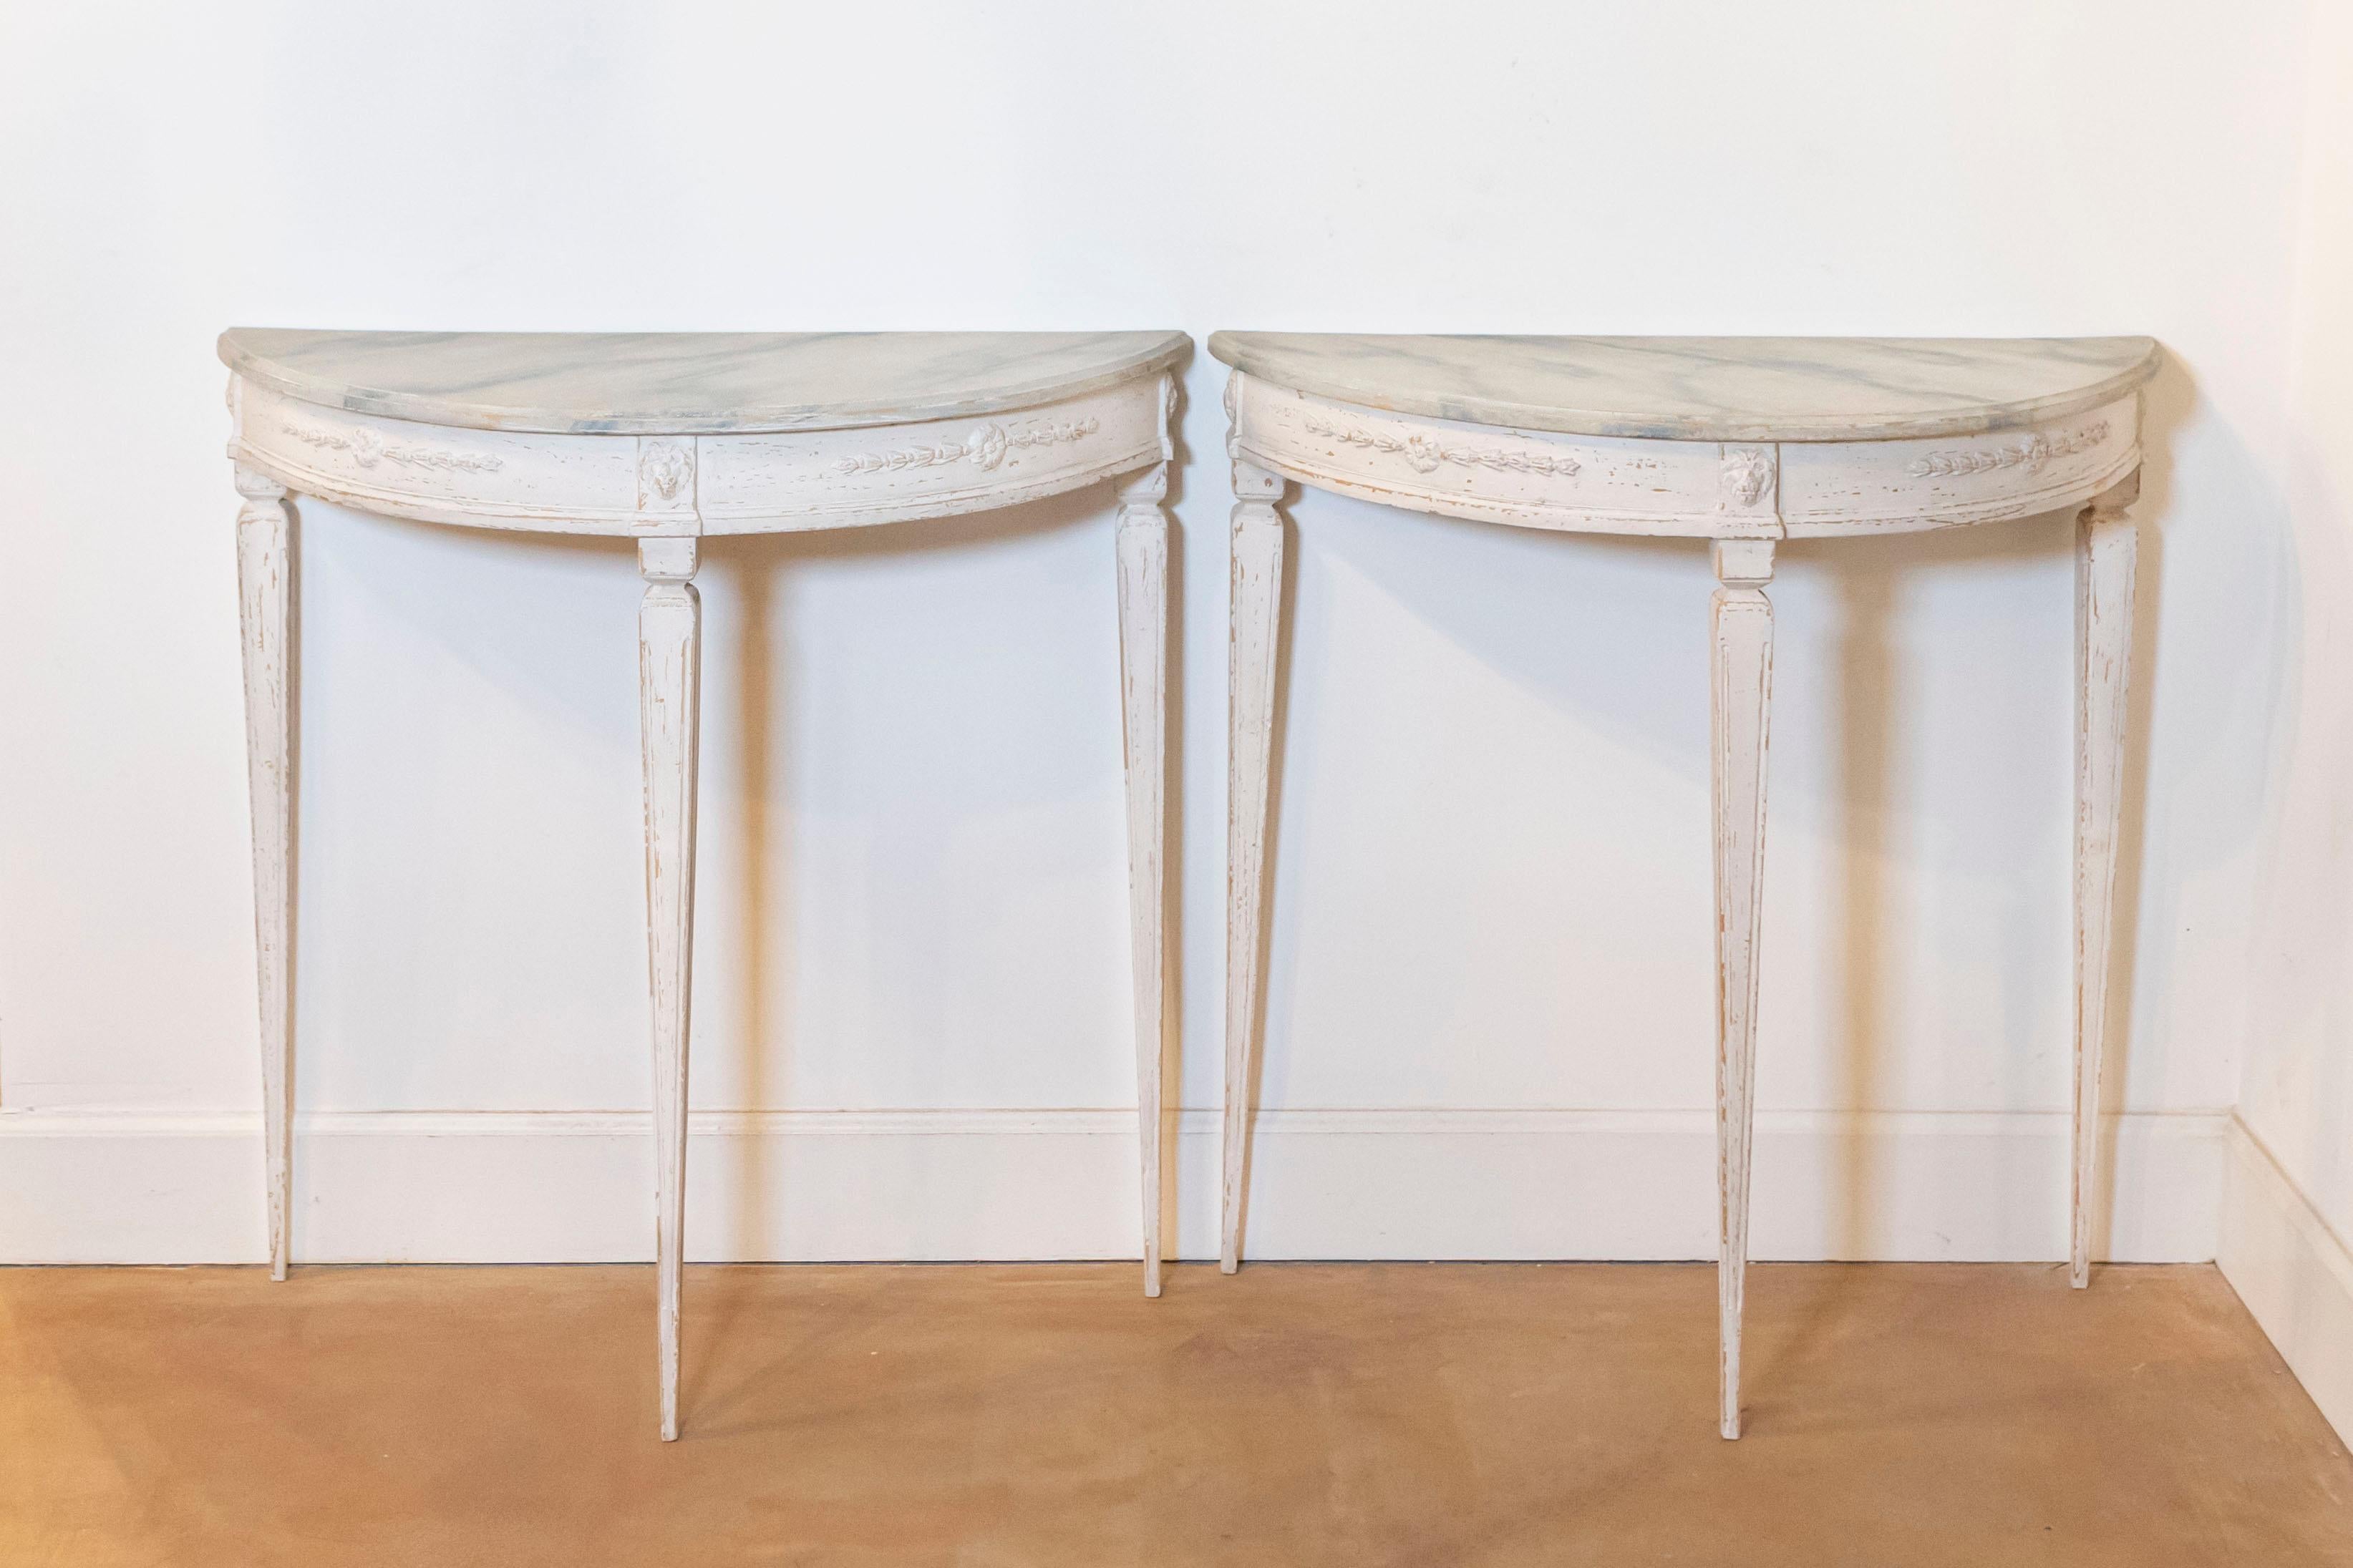 A pair of Swedish Gustavian style painted wood console tables from the early 20th century, with marbleized tops, carved aprons and tapered legs. Created in Sweden during the first quarter of the 20th century, each of this pair of console tables